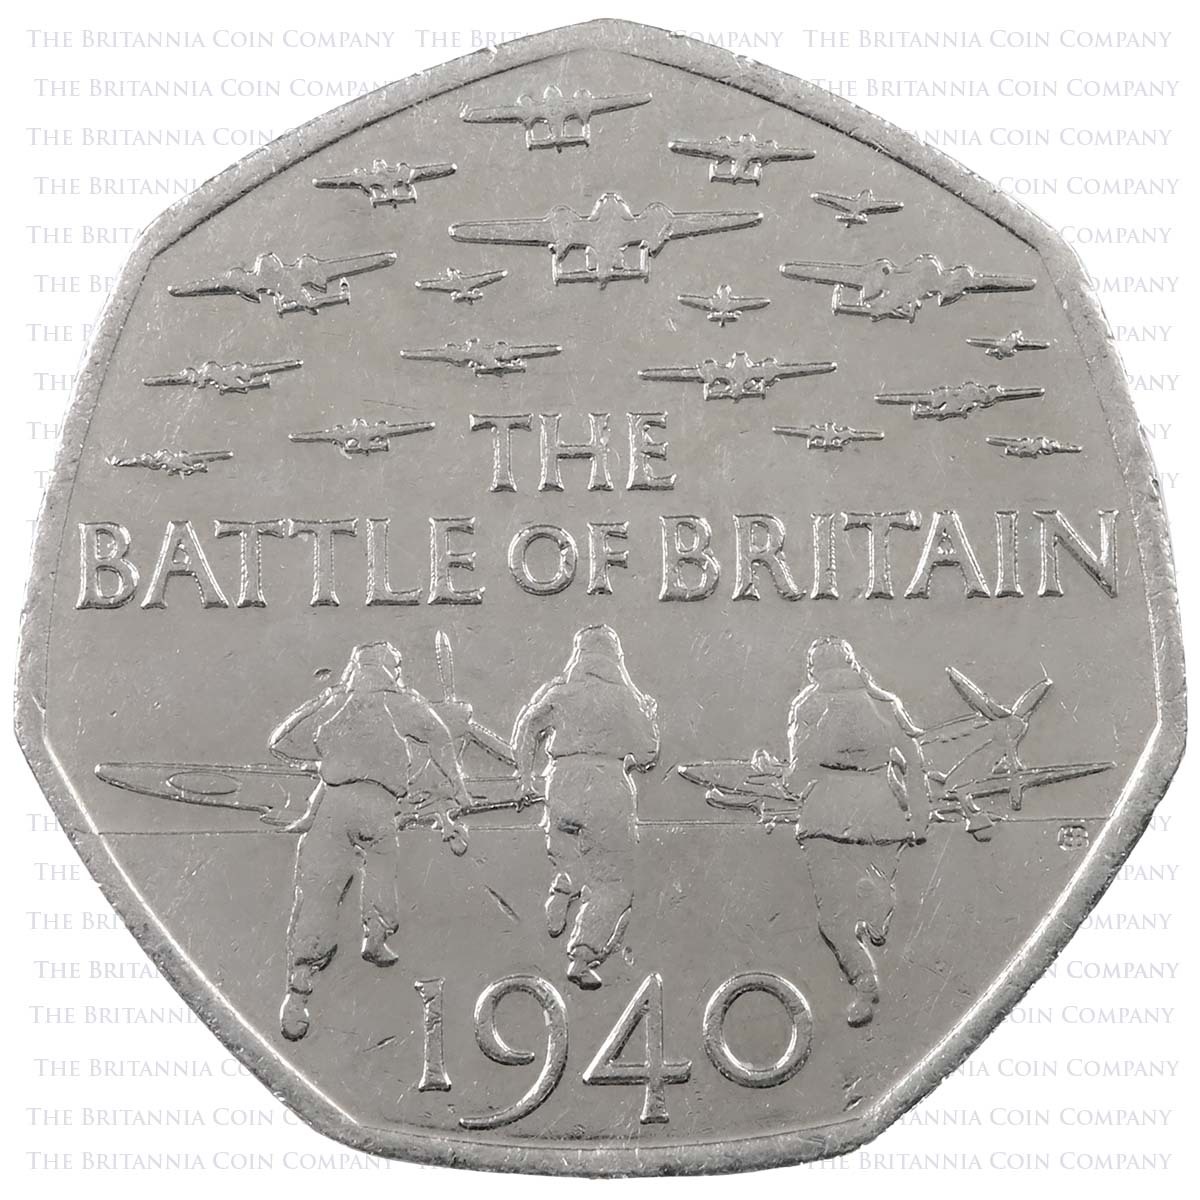 2015 Battle Of Britain Anniversary Circulated Fifty Pence Coin Reverse